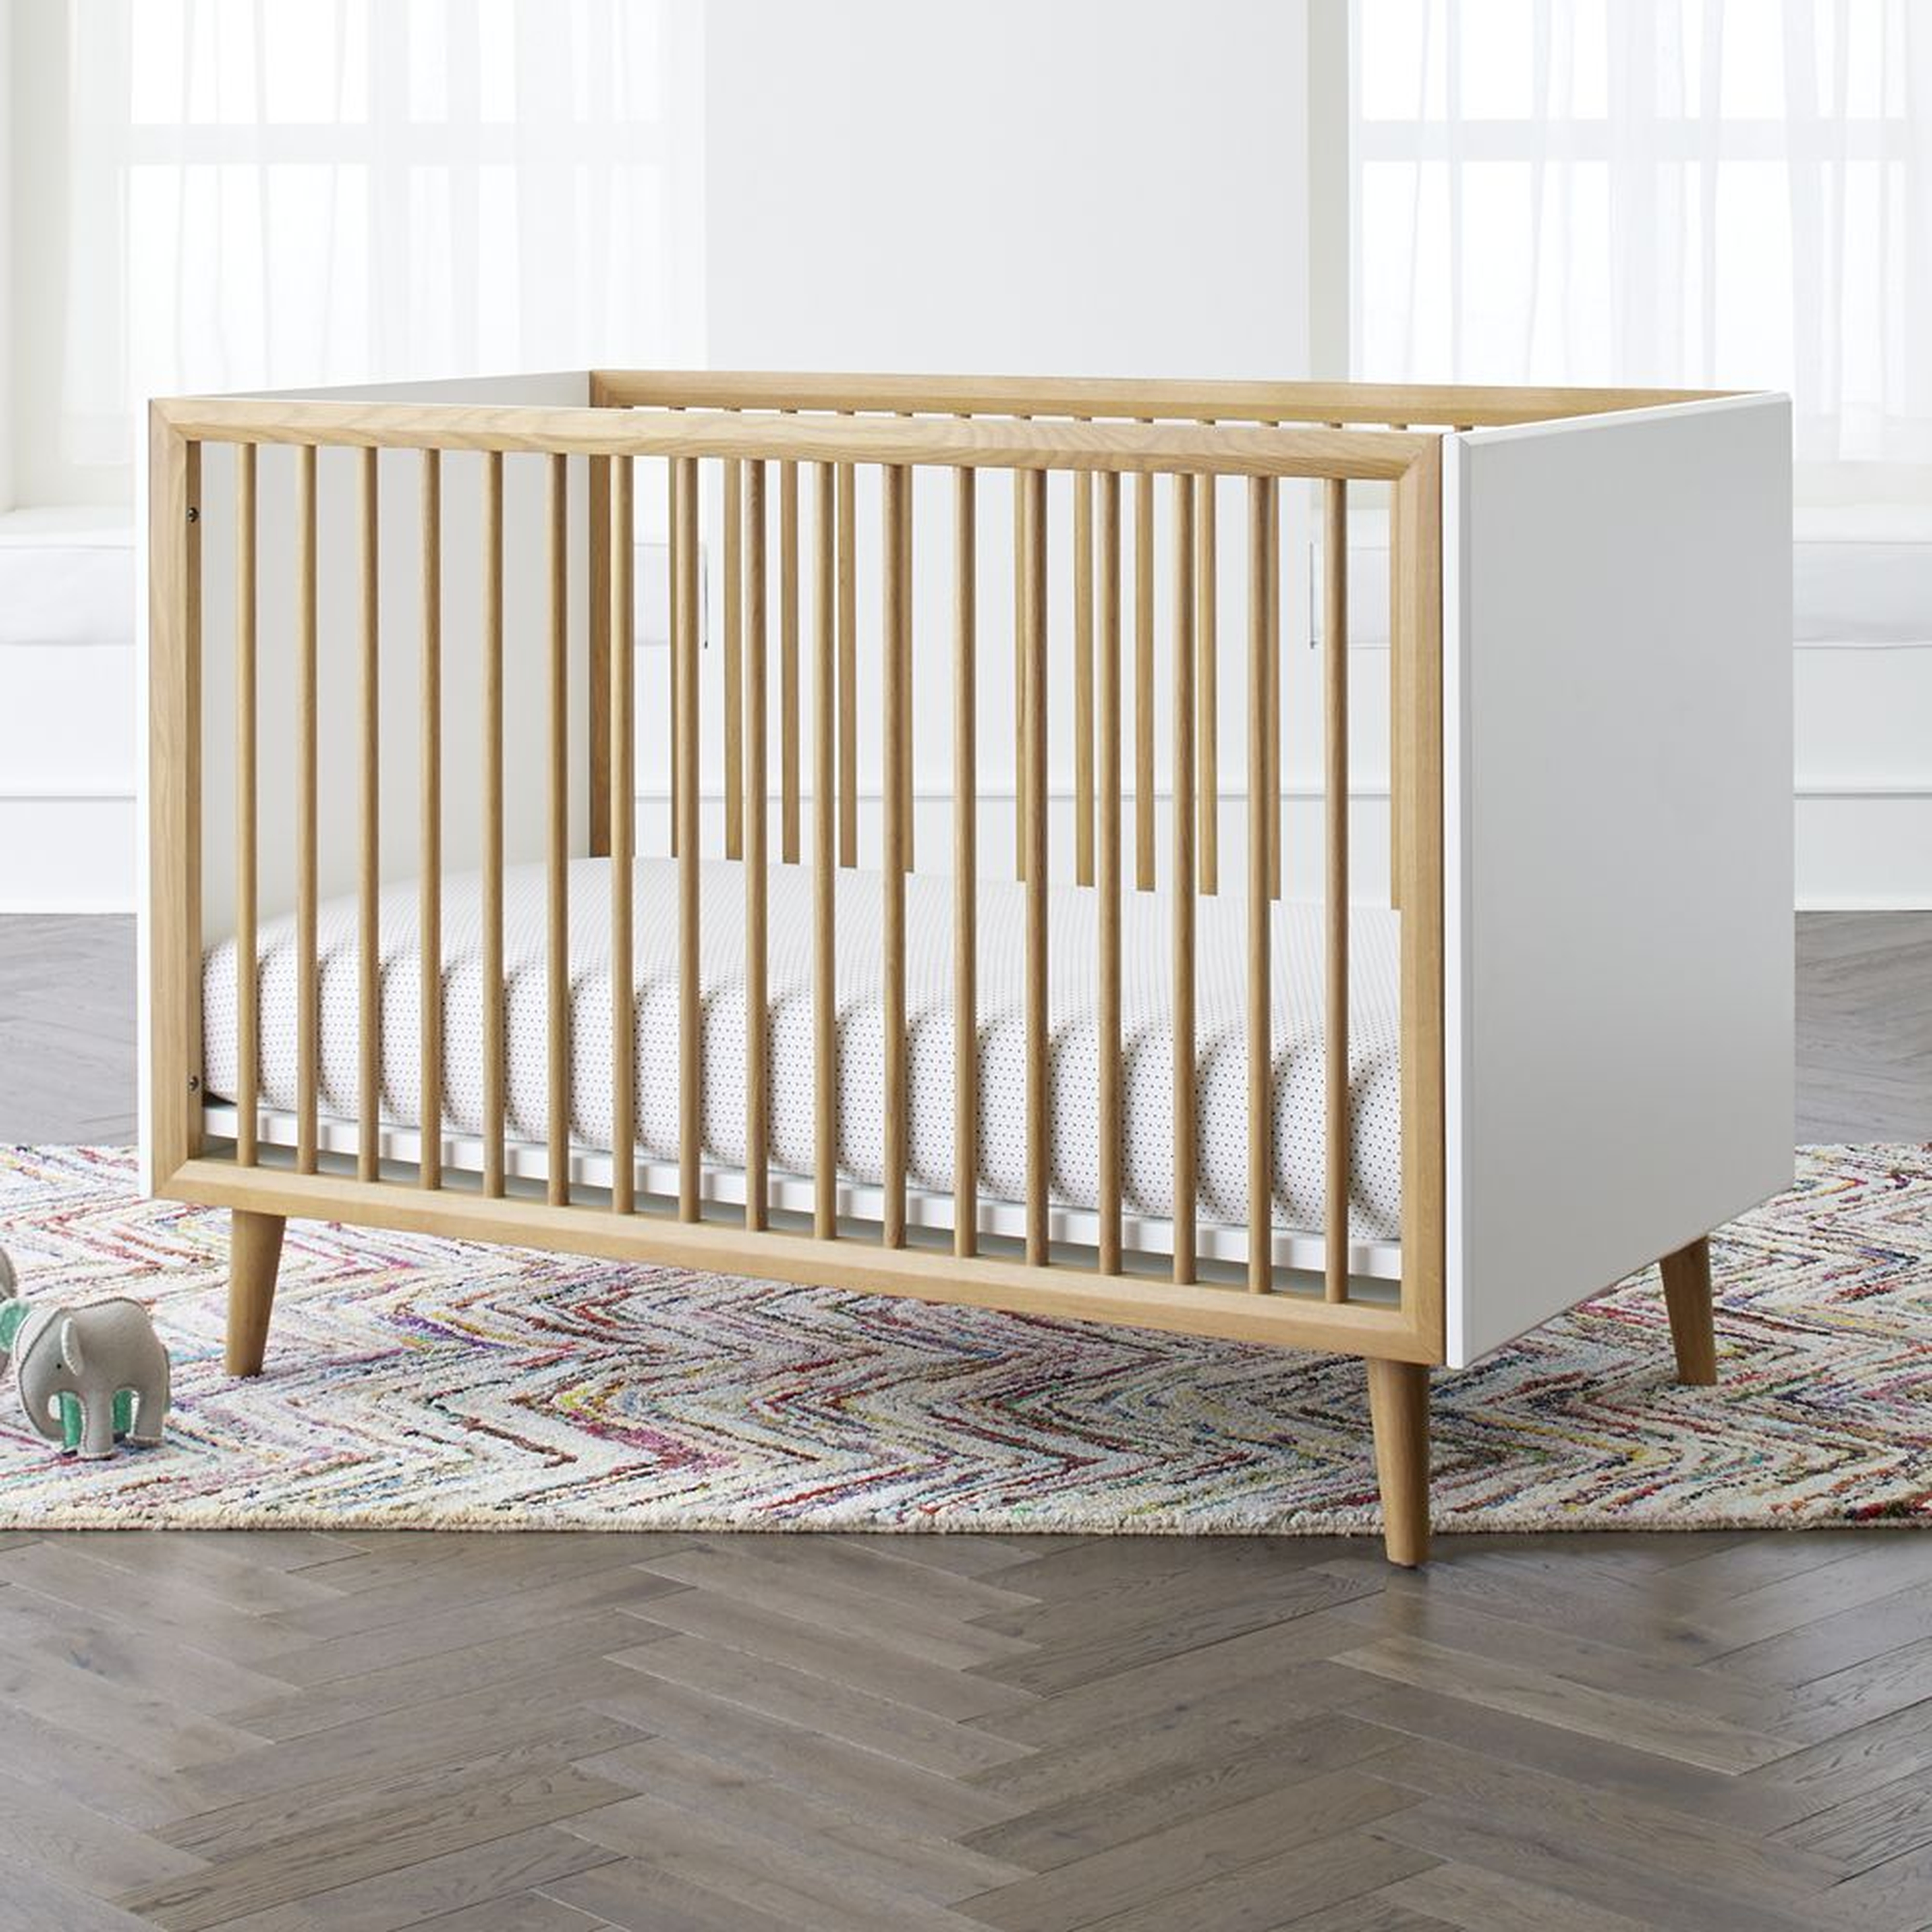 Mid-Century Spindle Crib - Crate and Barrel